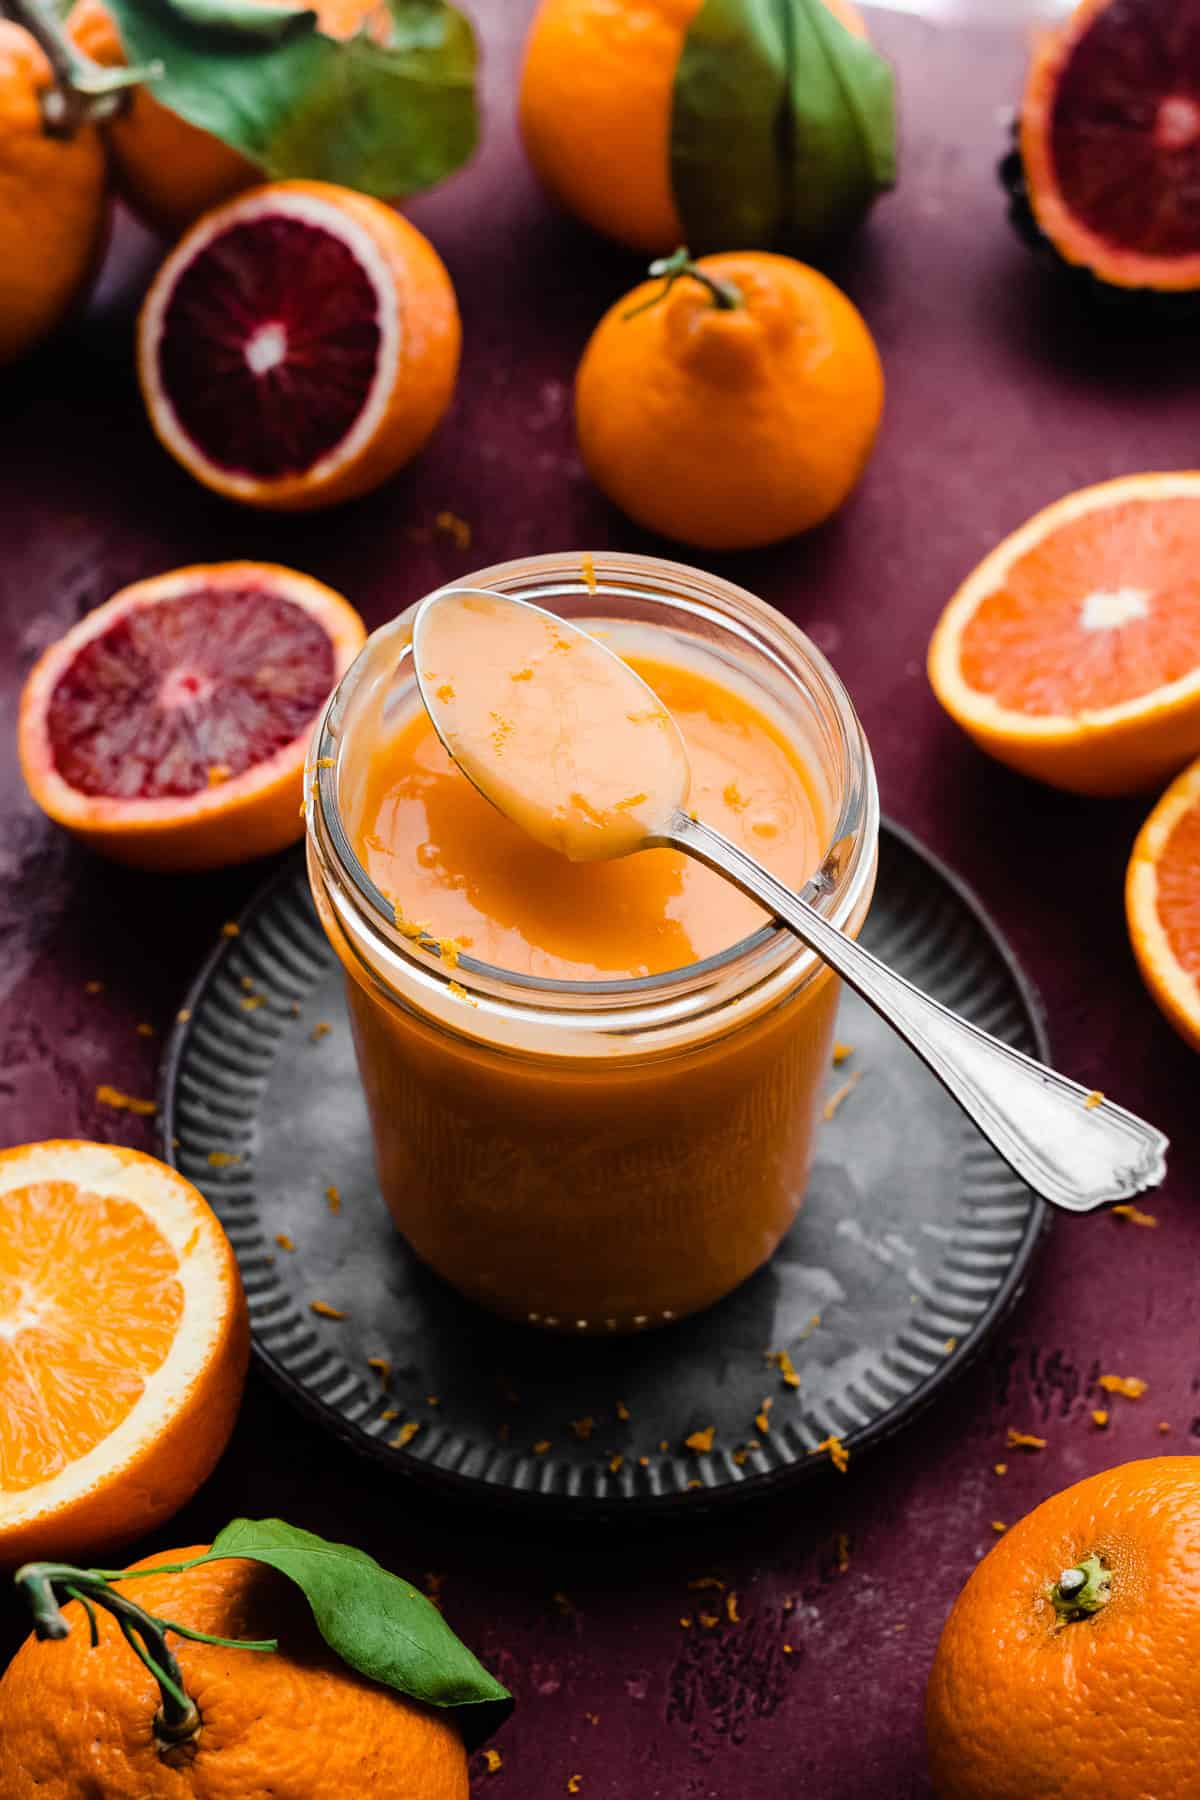 A spoonful of orange curd resting on top of a jar of the silky orange curd.